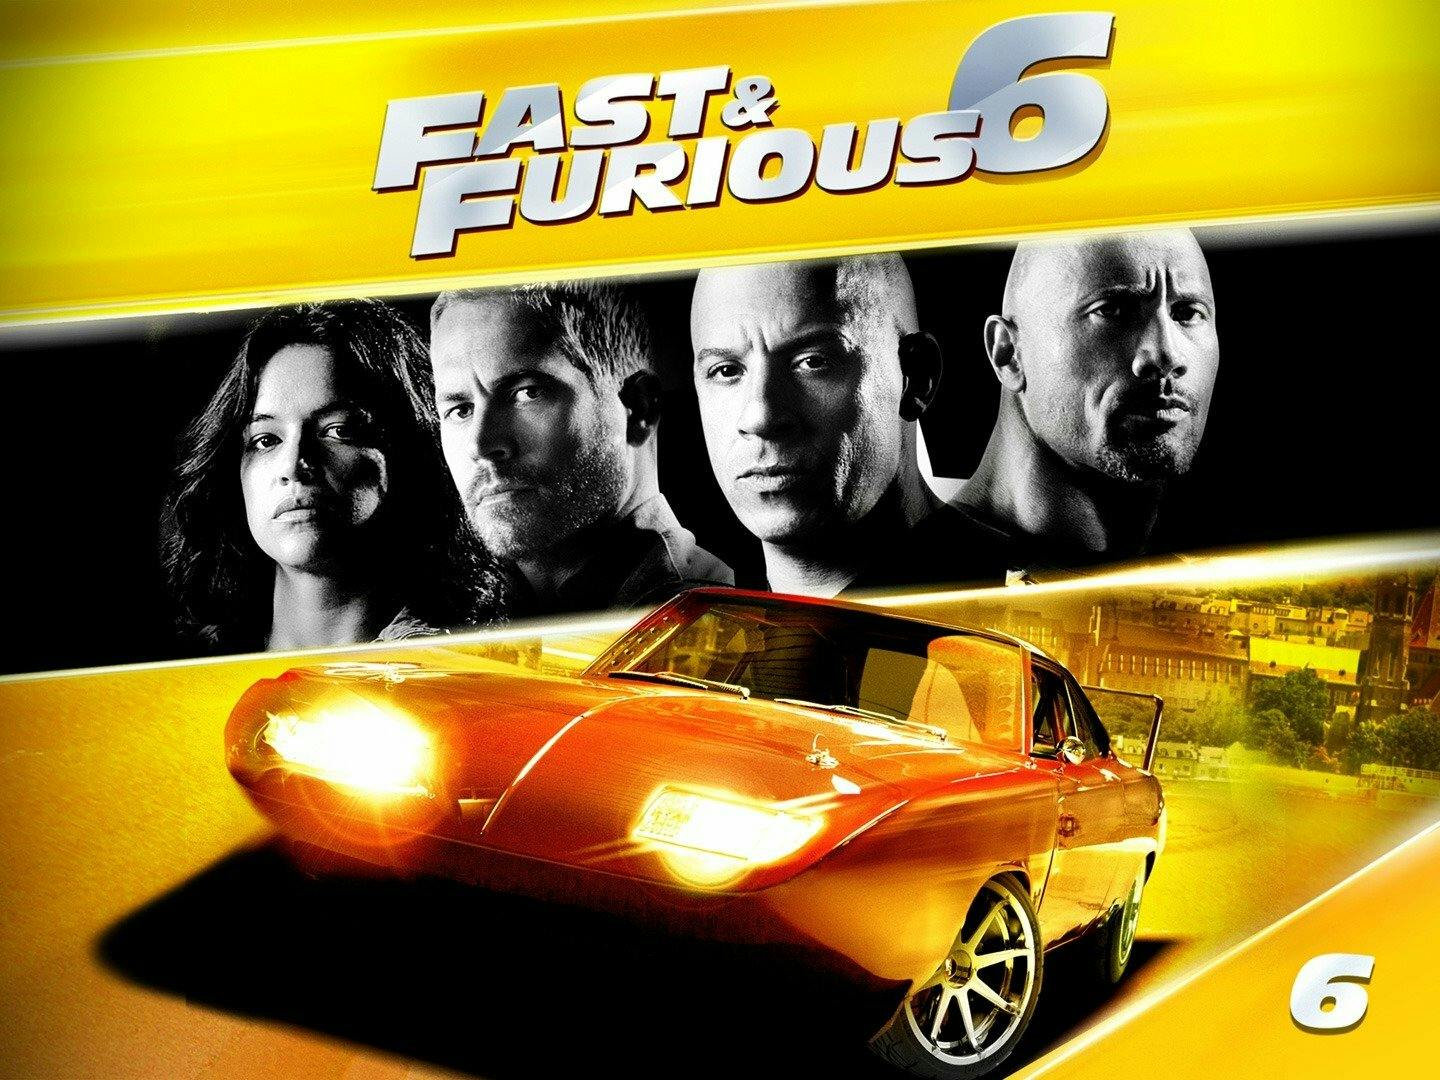 Fast & Furious 6 Image